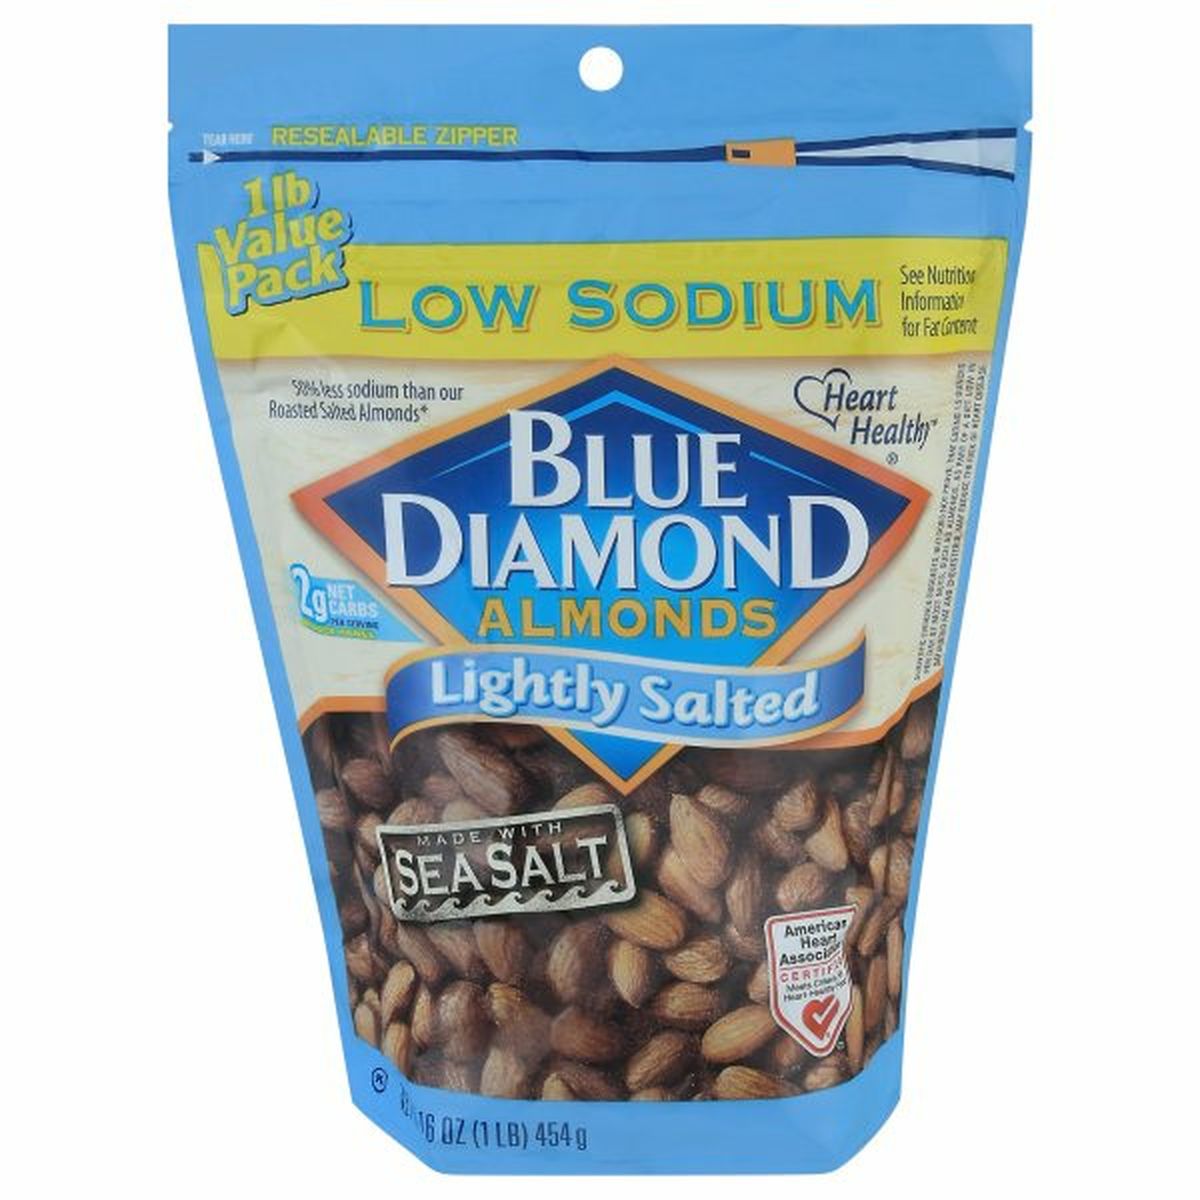 Calories in Blue Diamond Almonds, Lightly Salted, Low Sodium, Value Pack